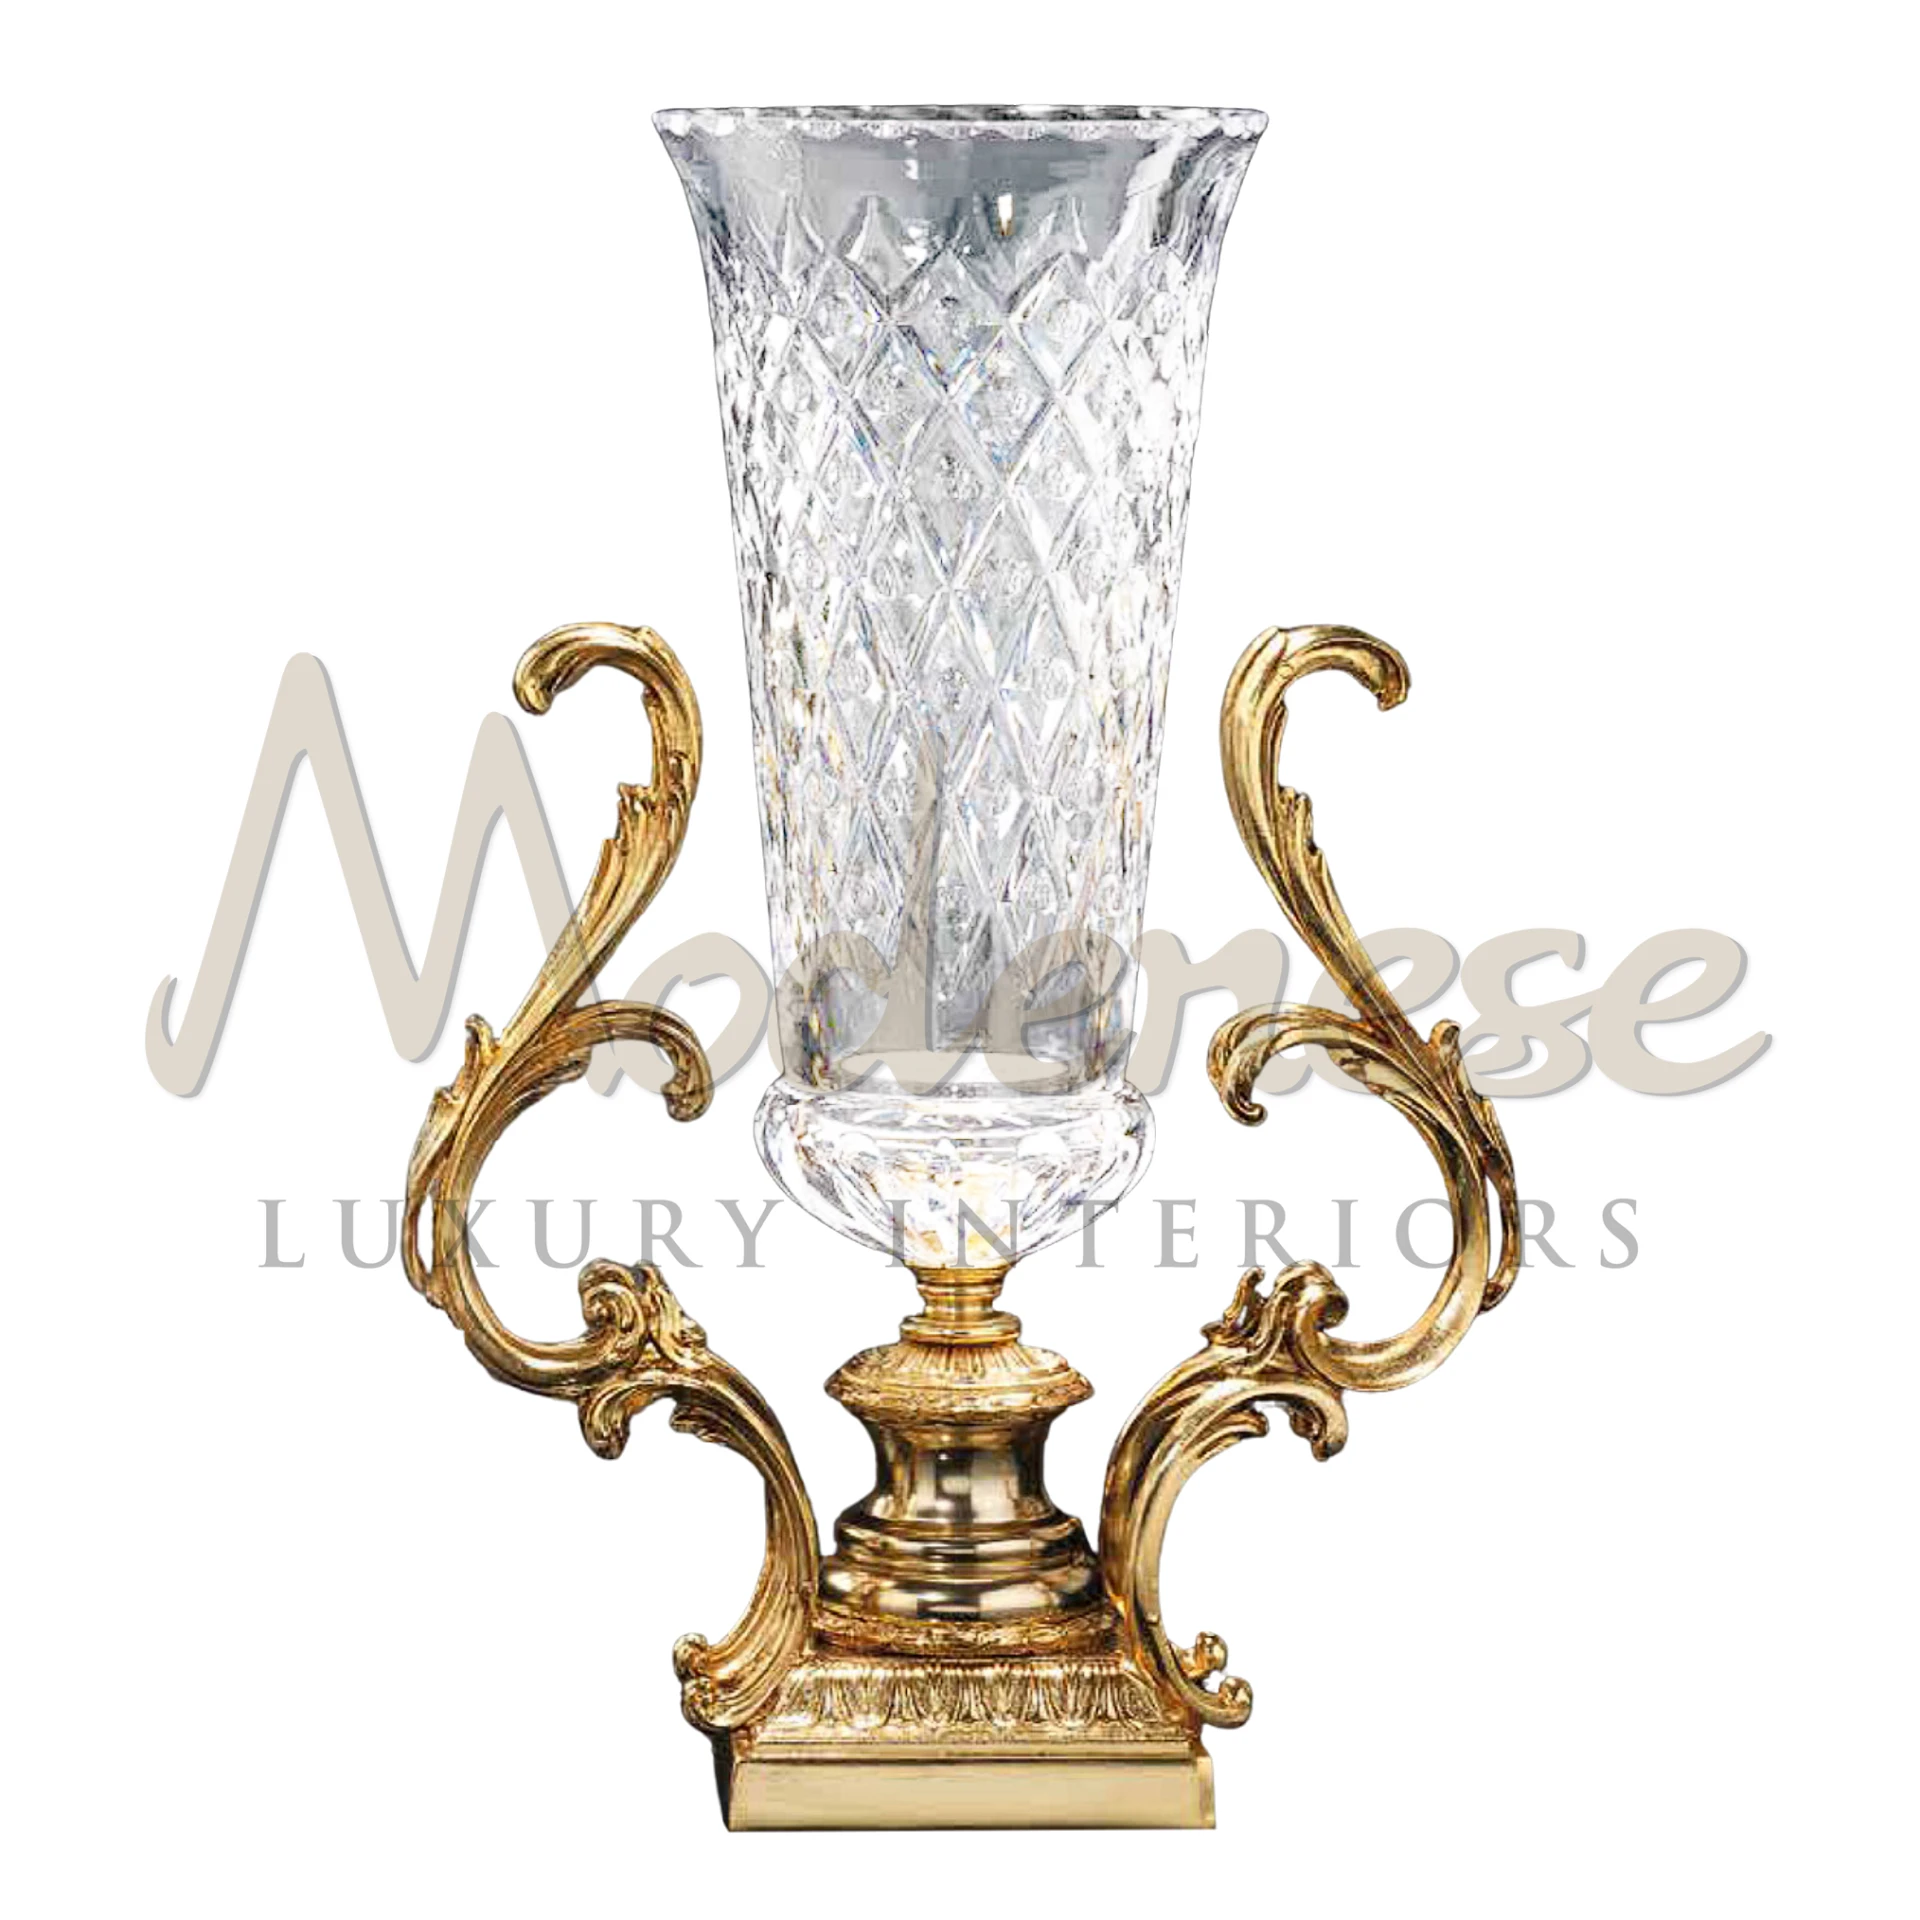 Luxury Tall Glass Vase, versatile for fresh flowers or as a decorative item, bringing glamour and elegance to any setting.